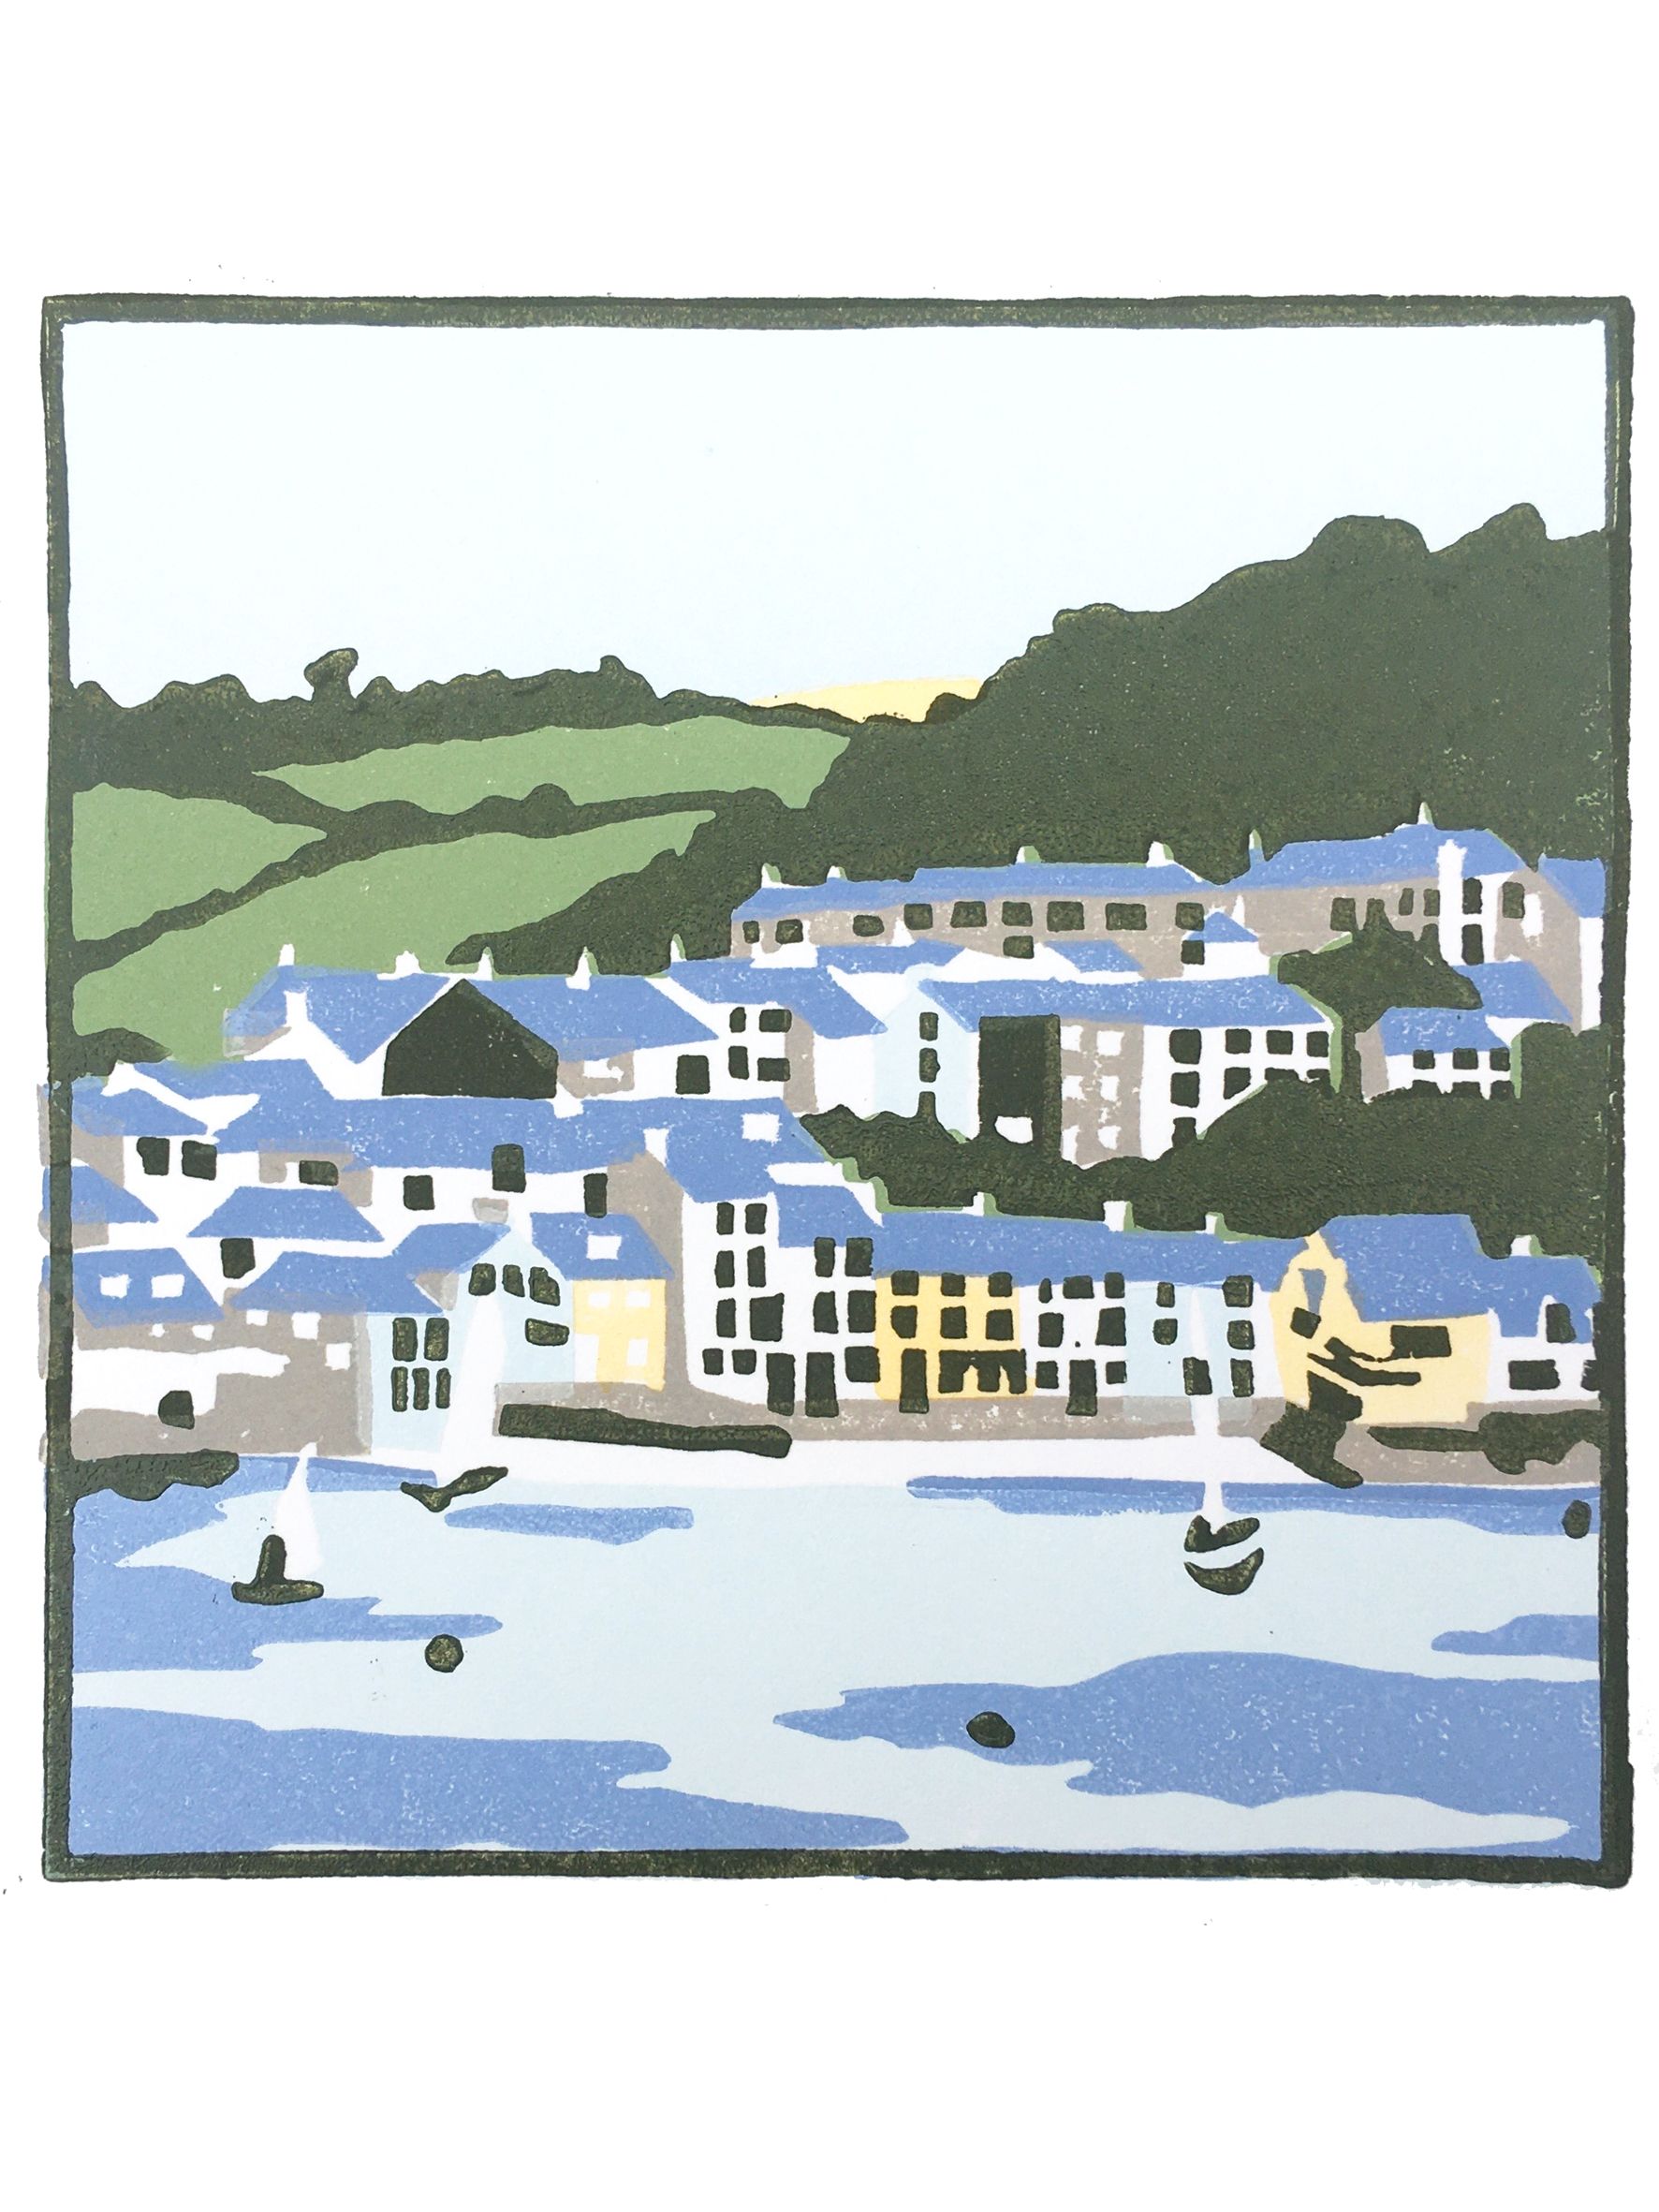 A Cornish Village by Fiona Carver